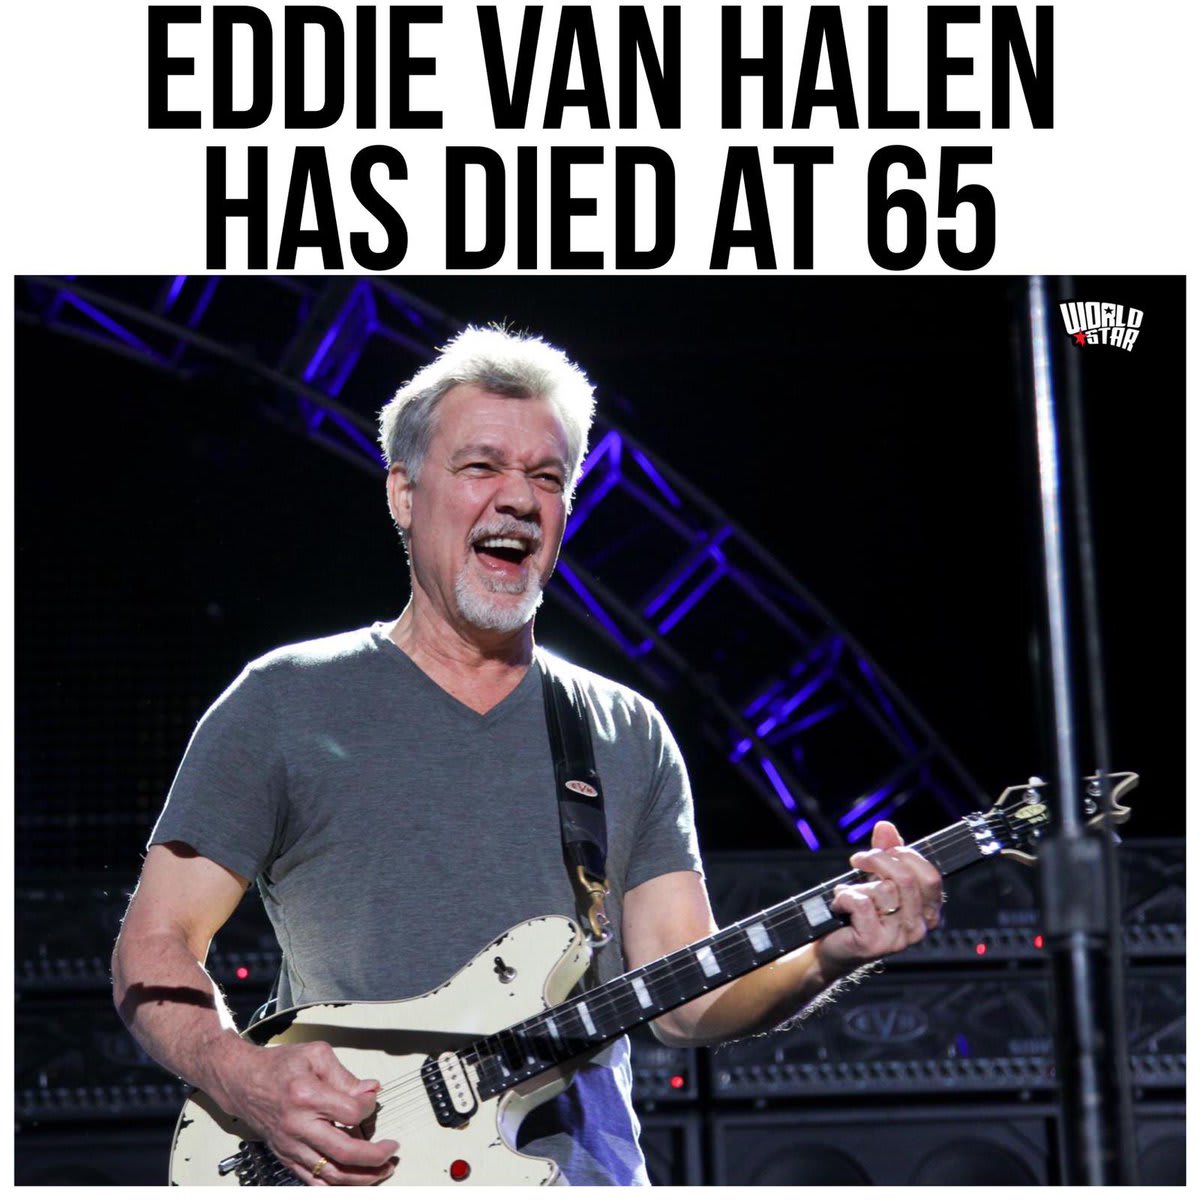 According to reports, legendary guitarist, EddieVanHalen of the band Van Halen, has passed away at the age of 65 following a battle with throat cancer. Our thoughts and prayers go out to his family and friends. 🙏